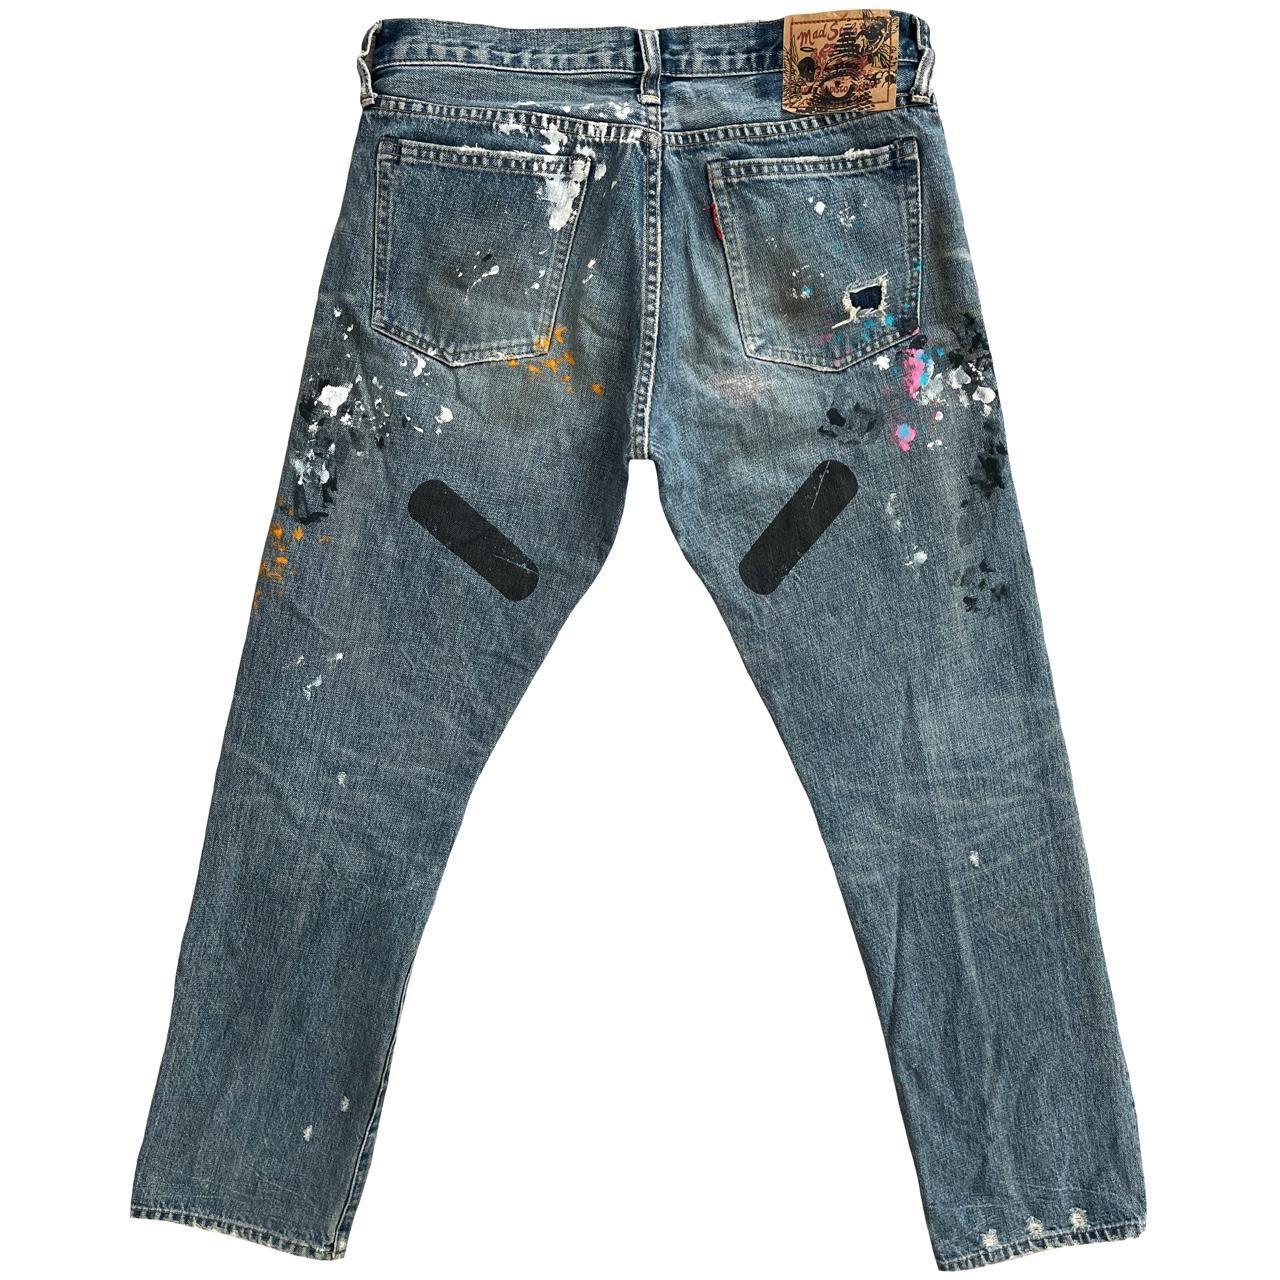 RNA Distressed Jeans - Known Source